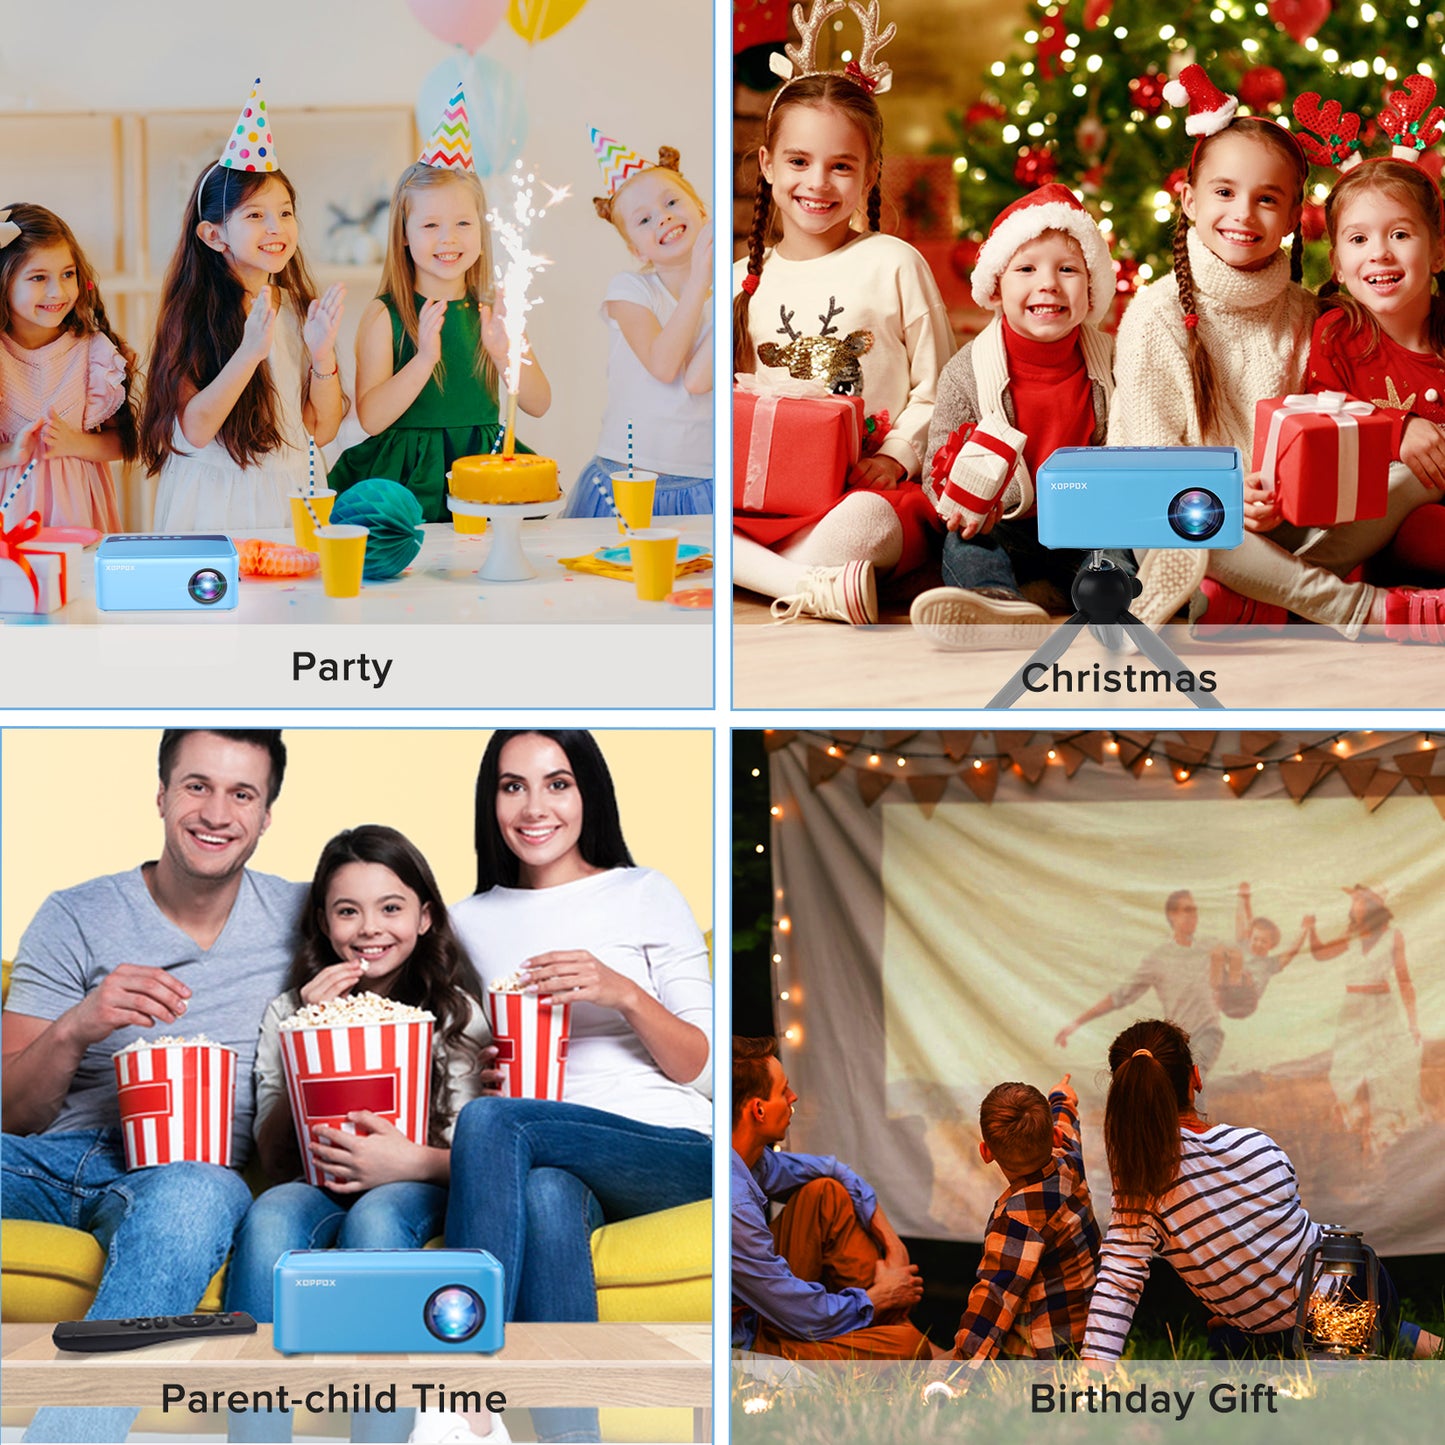 Mini Video Projector for Cartoon, Portable Outdoor Movie Projector for Kids Gifts, XOPPOX Small Home Theater Projector for Phone with HDMI USB AV Interfaces